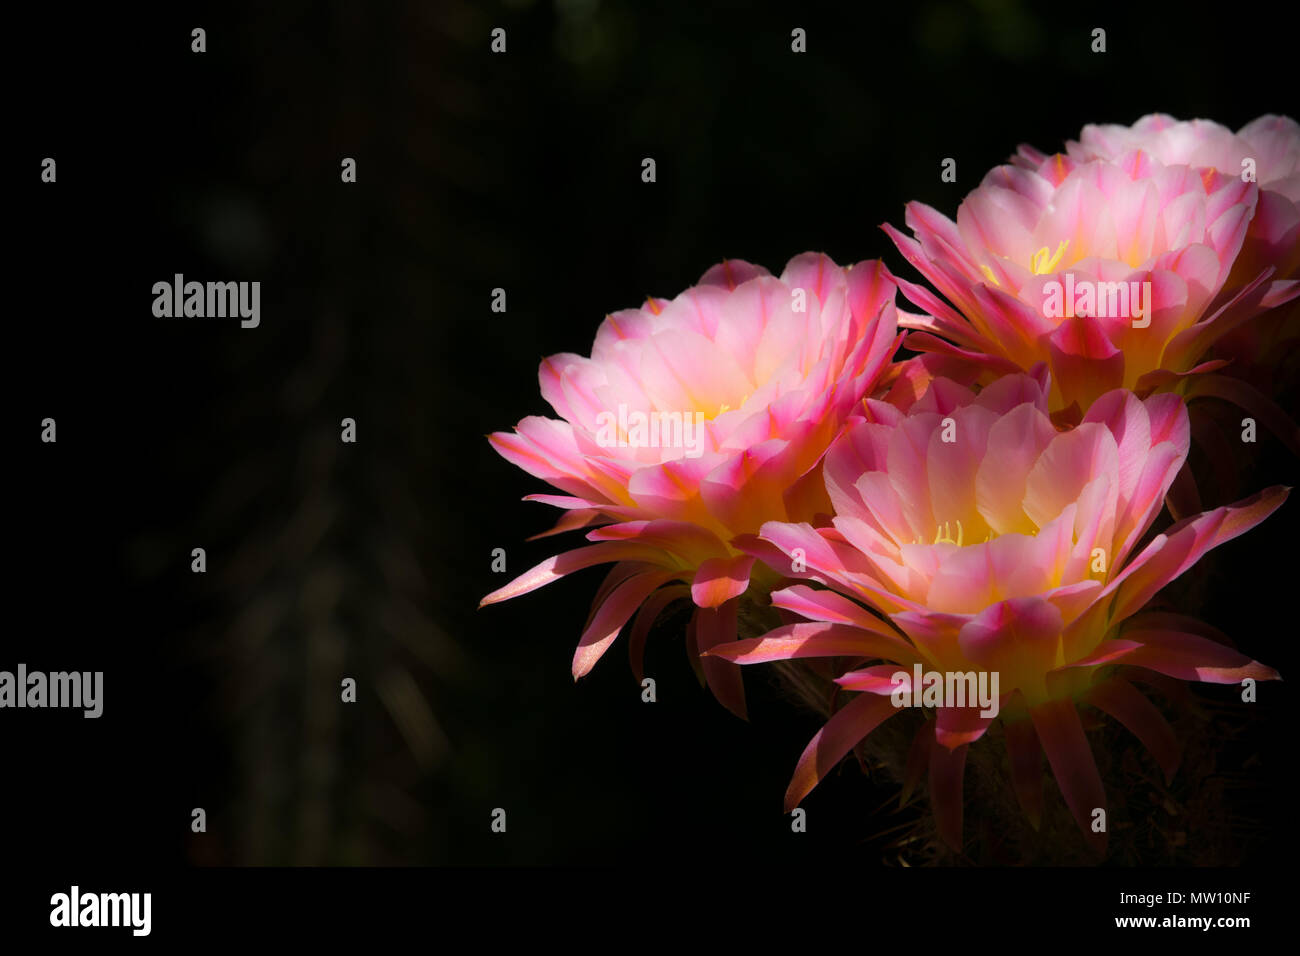 Torch Cactus Bloom, Large Pink Flowers Stock Photo